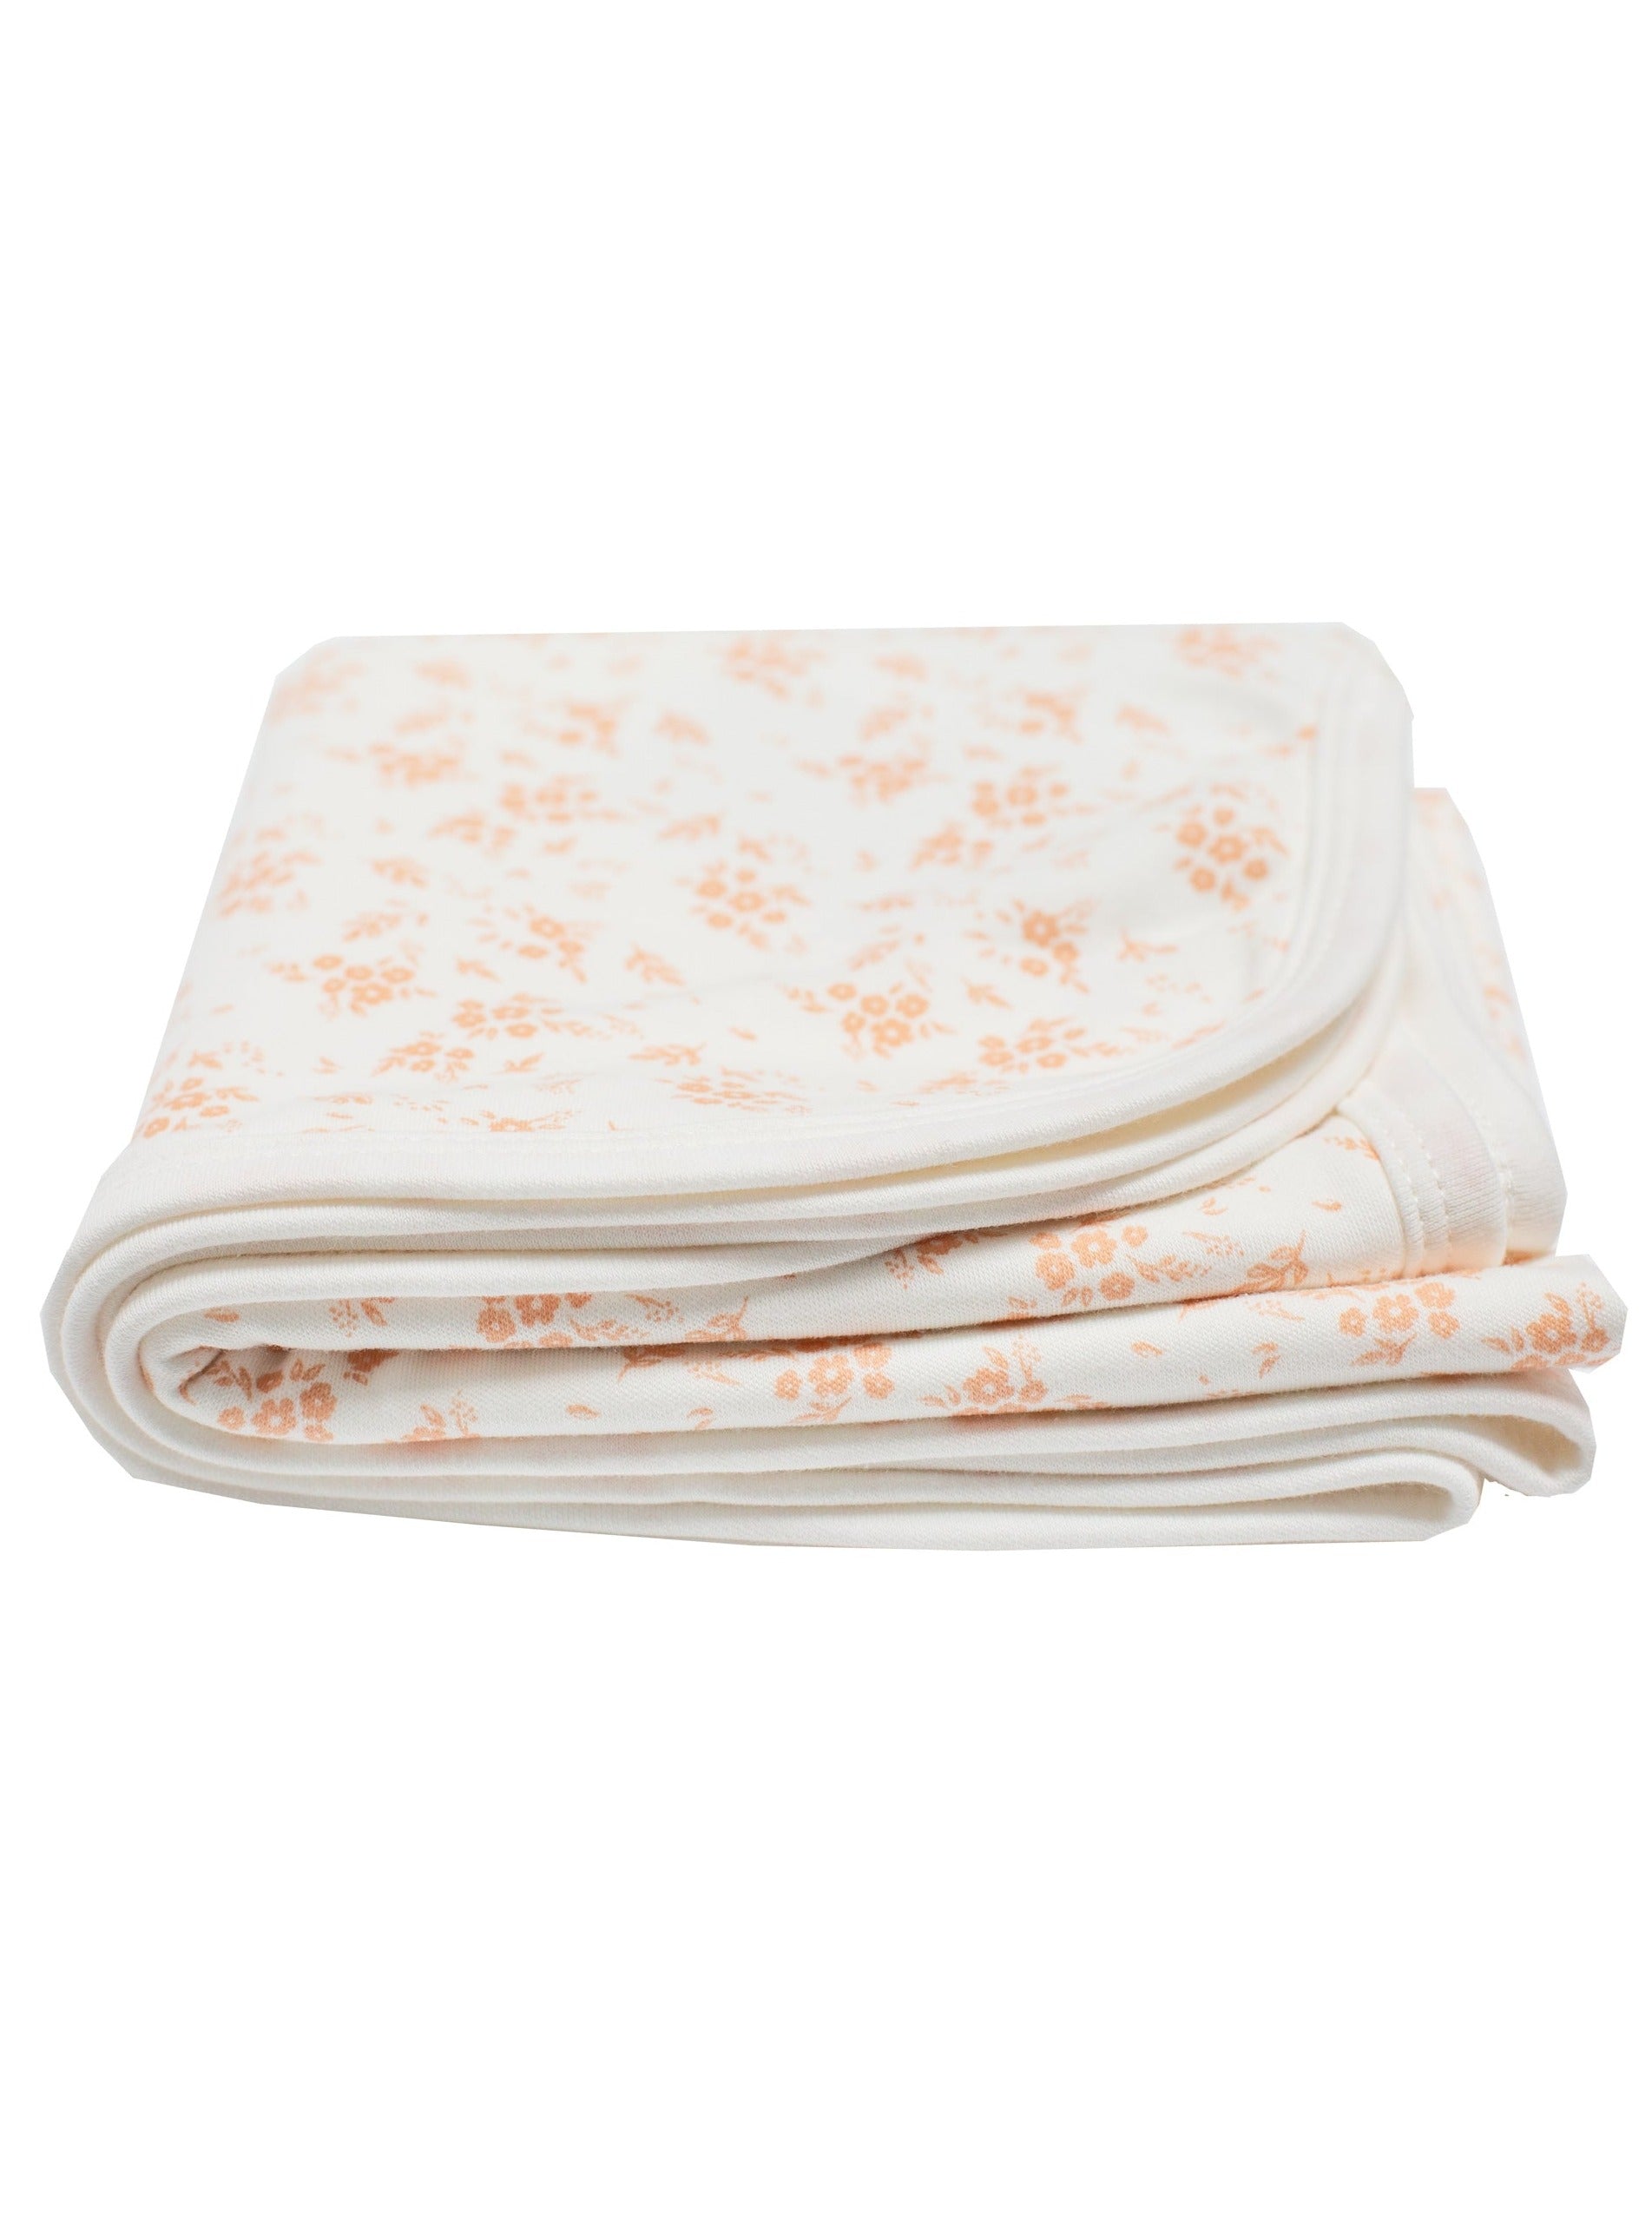 Organic Cotton Baby Blanket, Apricot Floral - Blanket - Tiny & Small